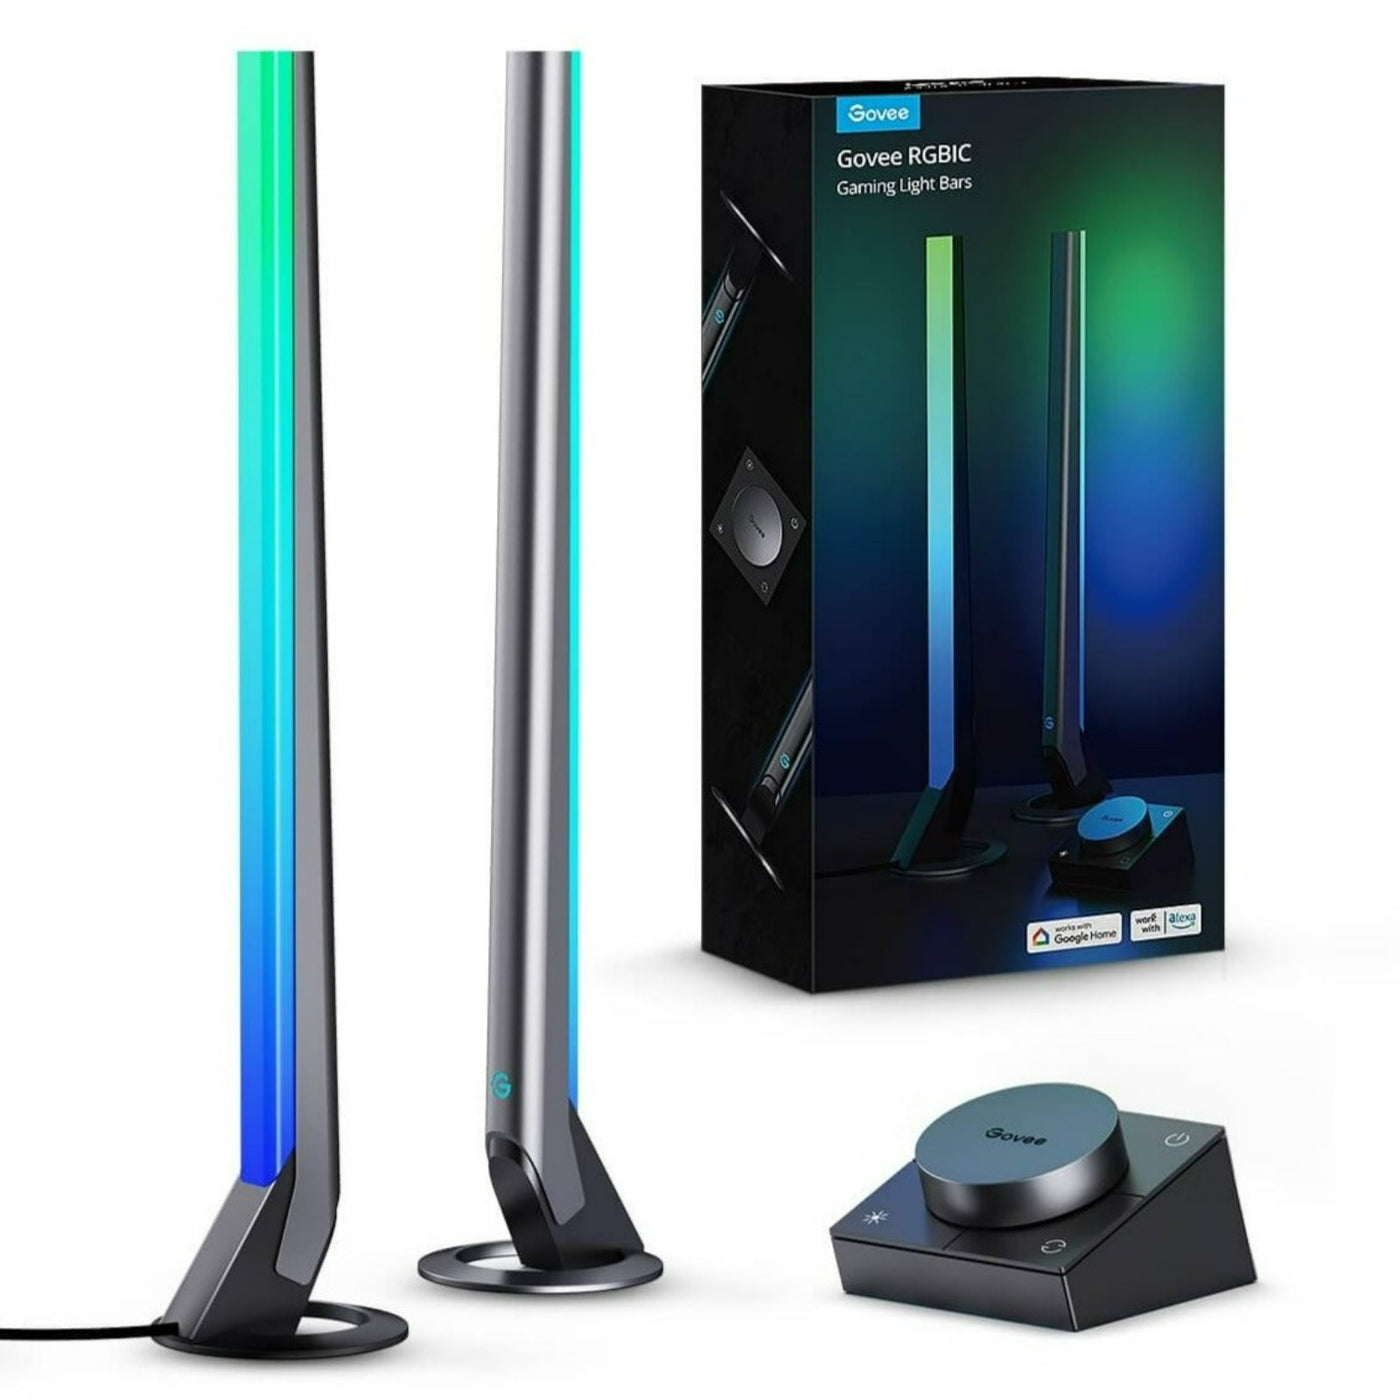 Govee RGBIC Wi-Fi Gaming Light Bars with Smart Controller